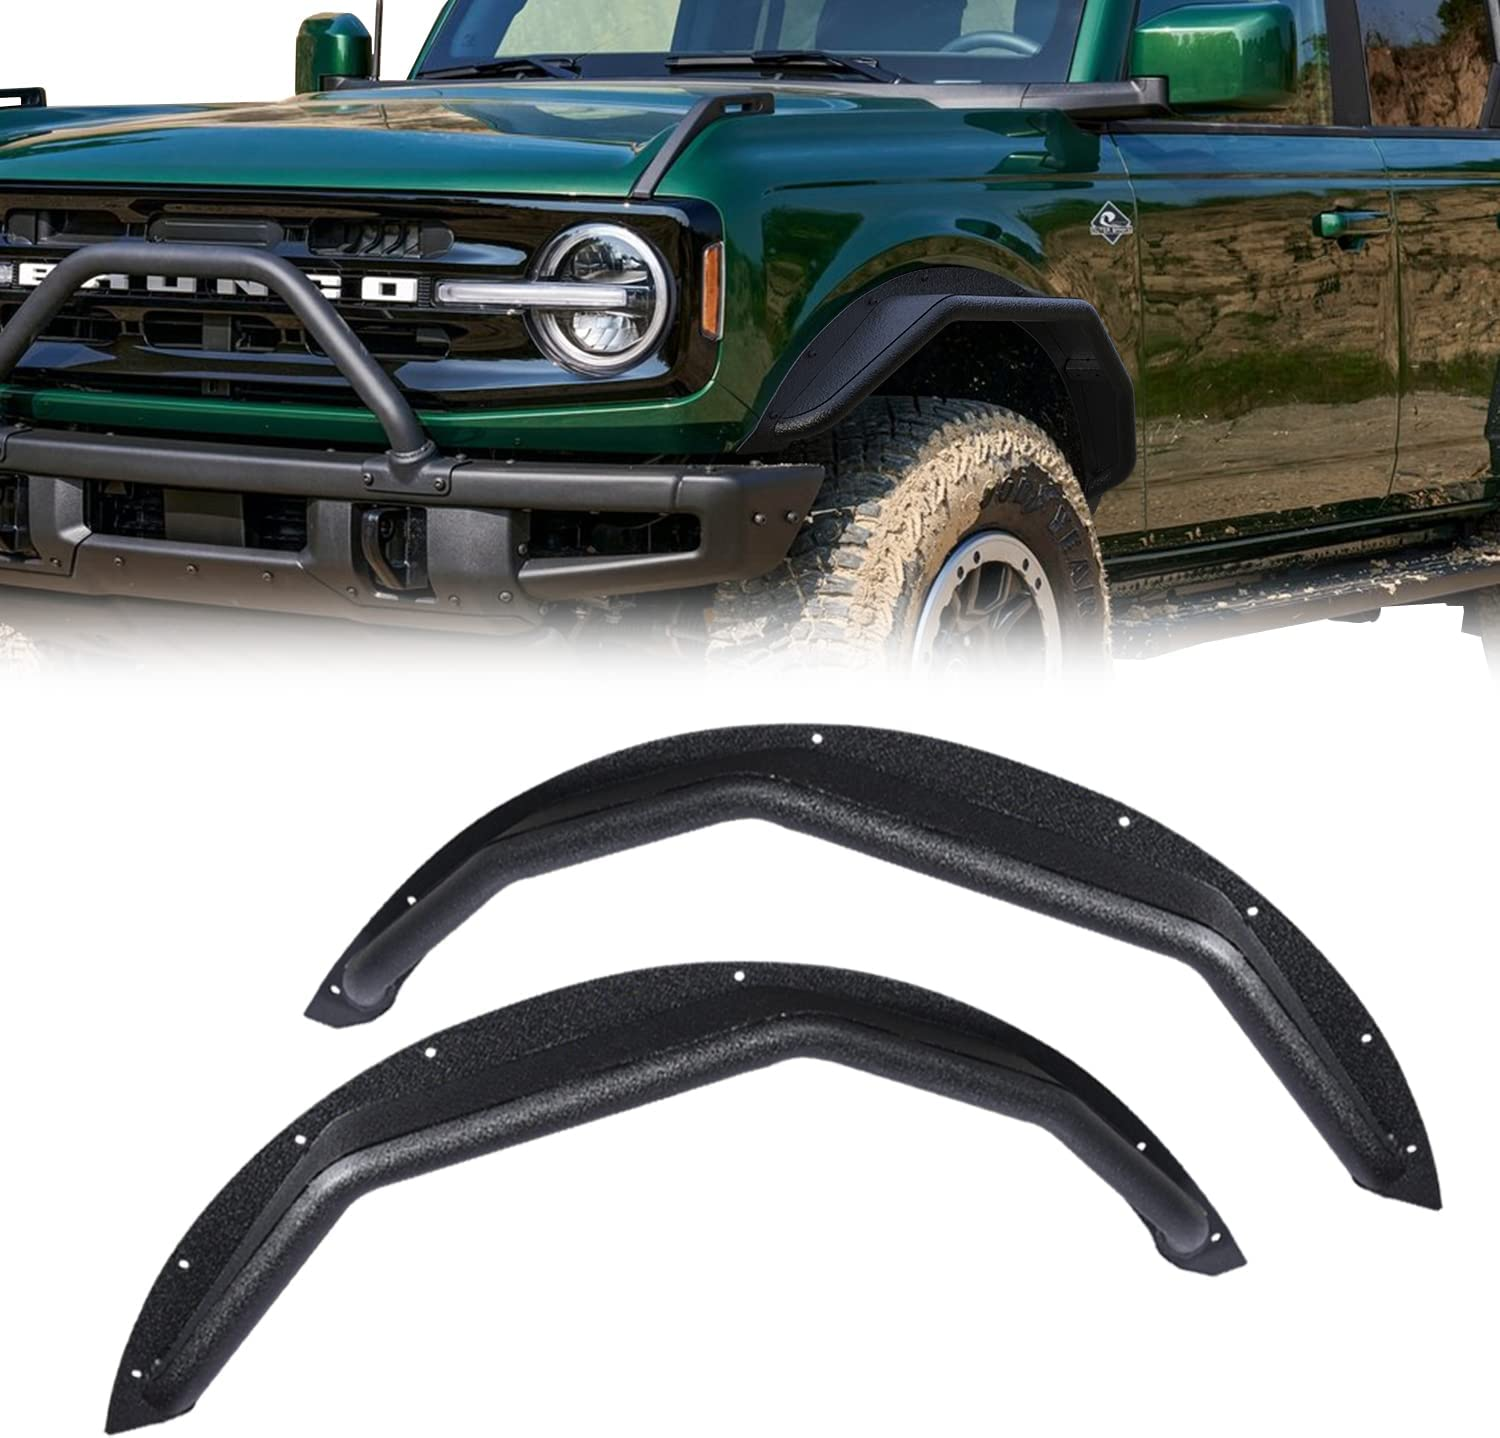 Ford Bronco Rynoskin Flares - squarish flares for the round fenders 1661285551365